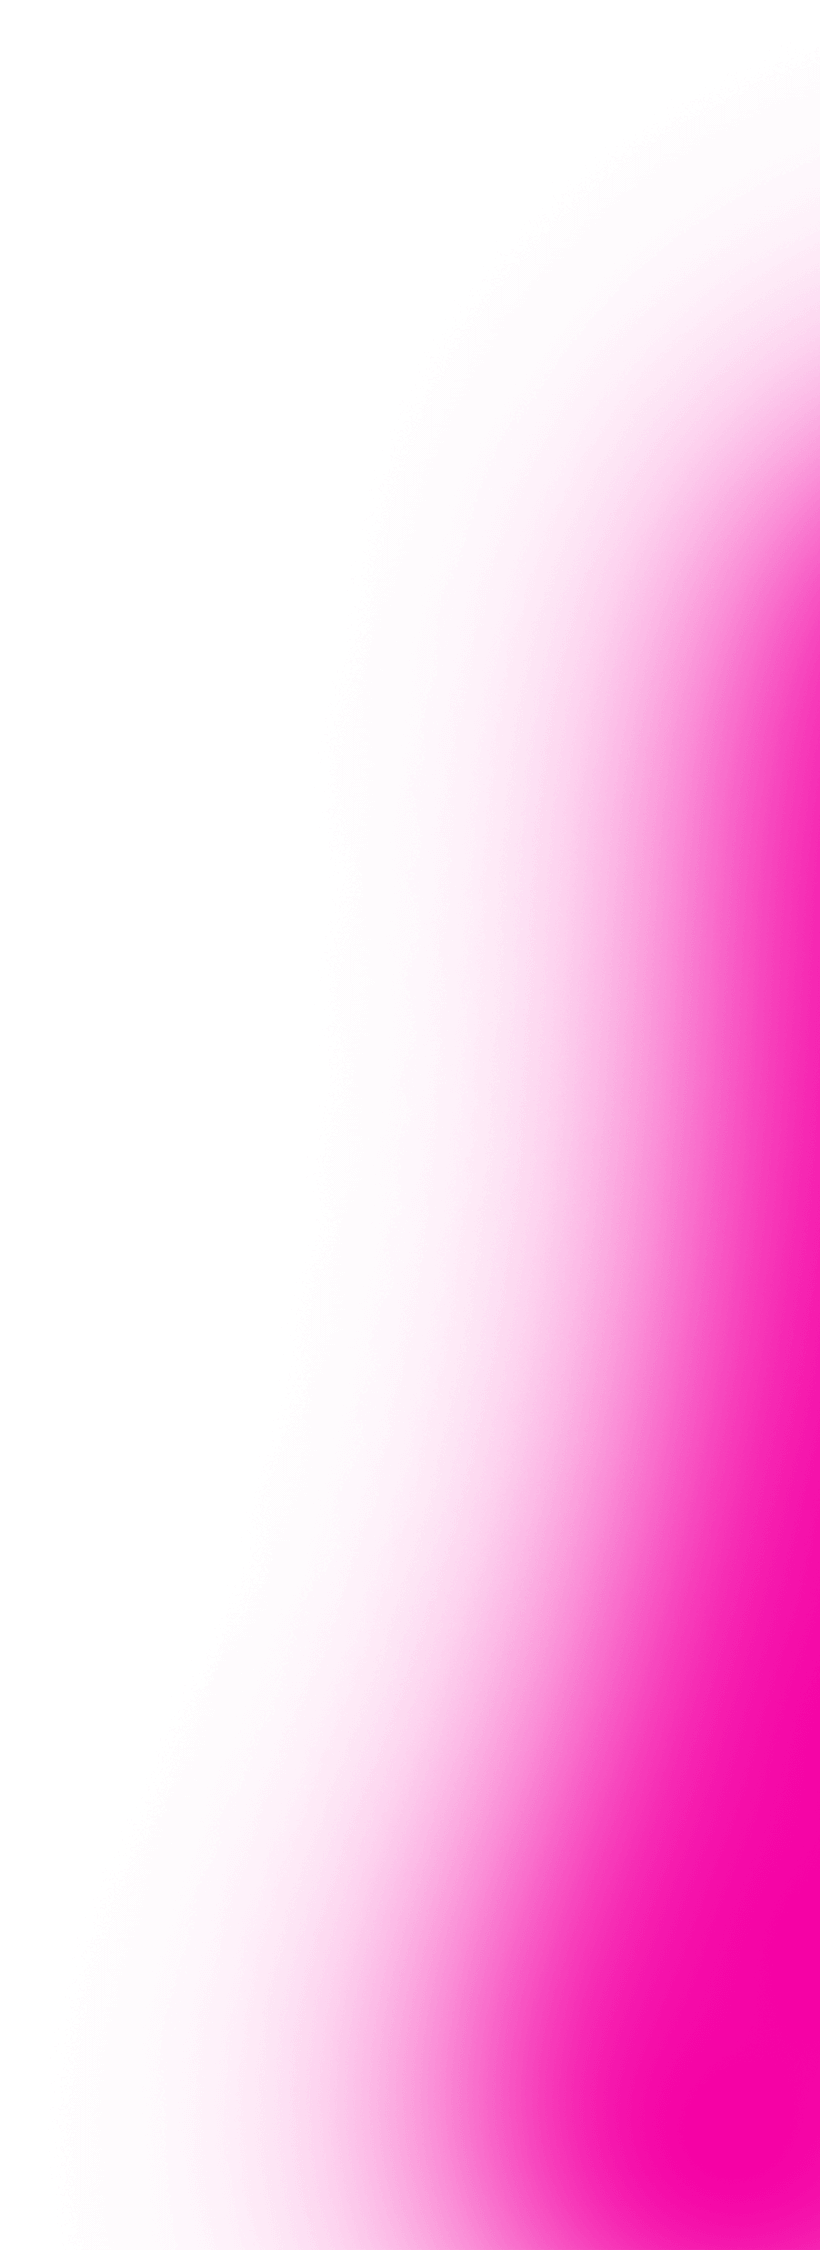 26617-layer-12-16660045586135.png